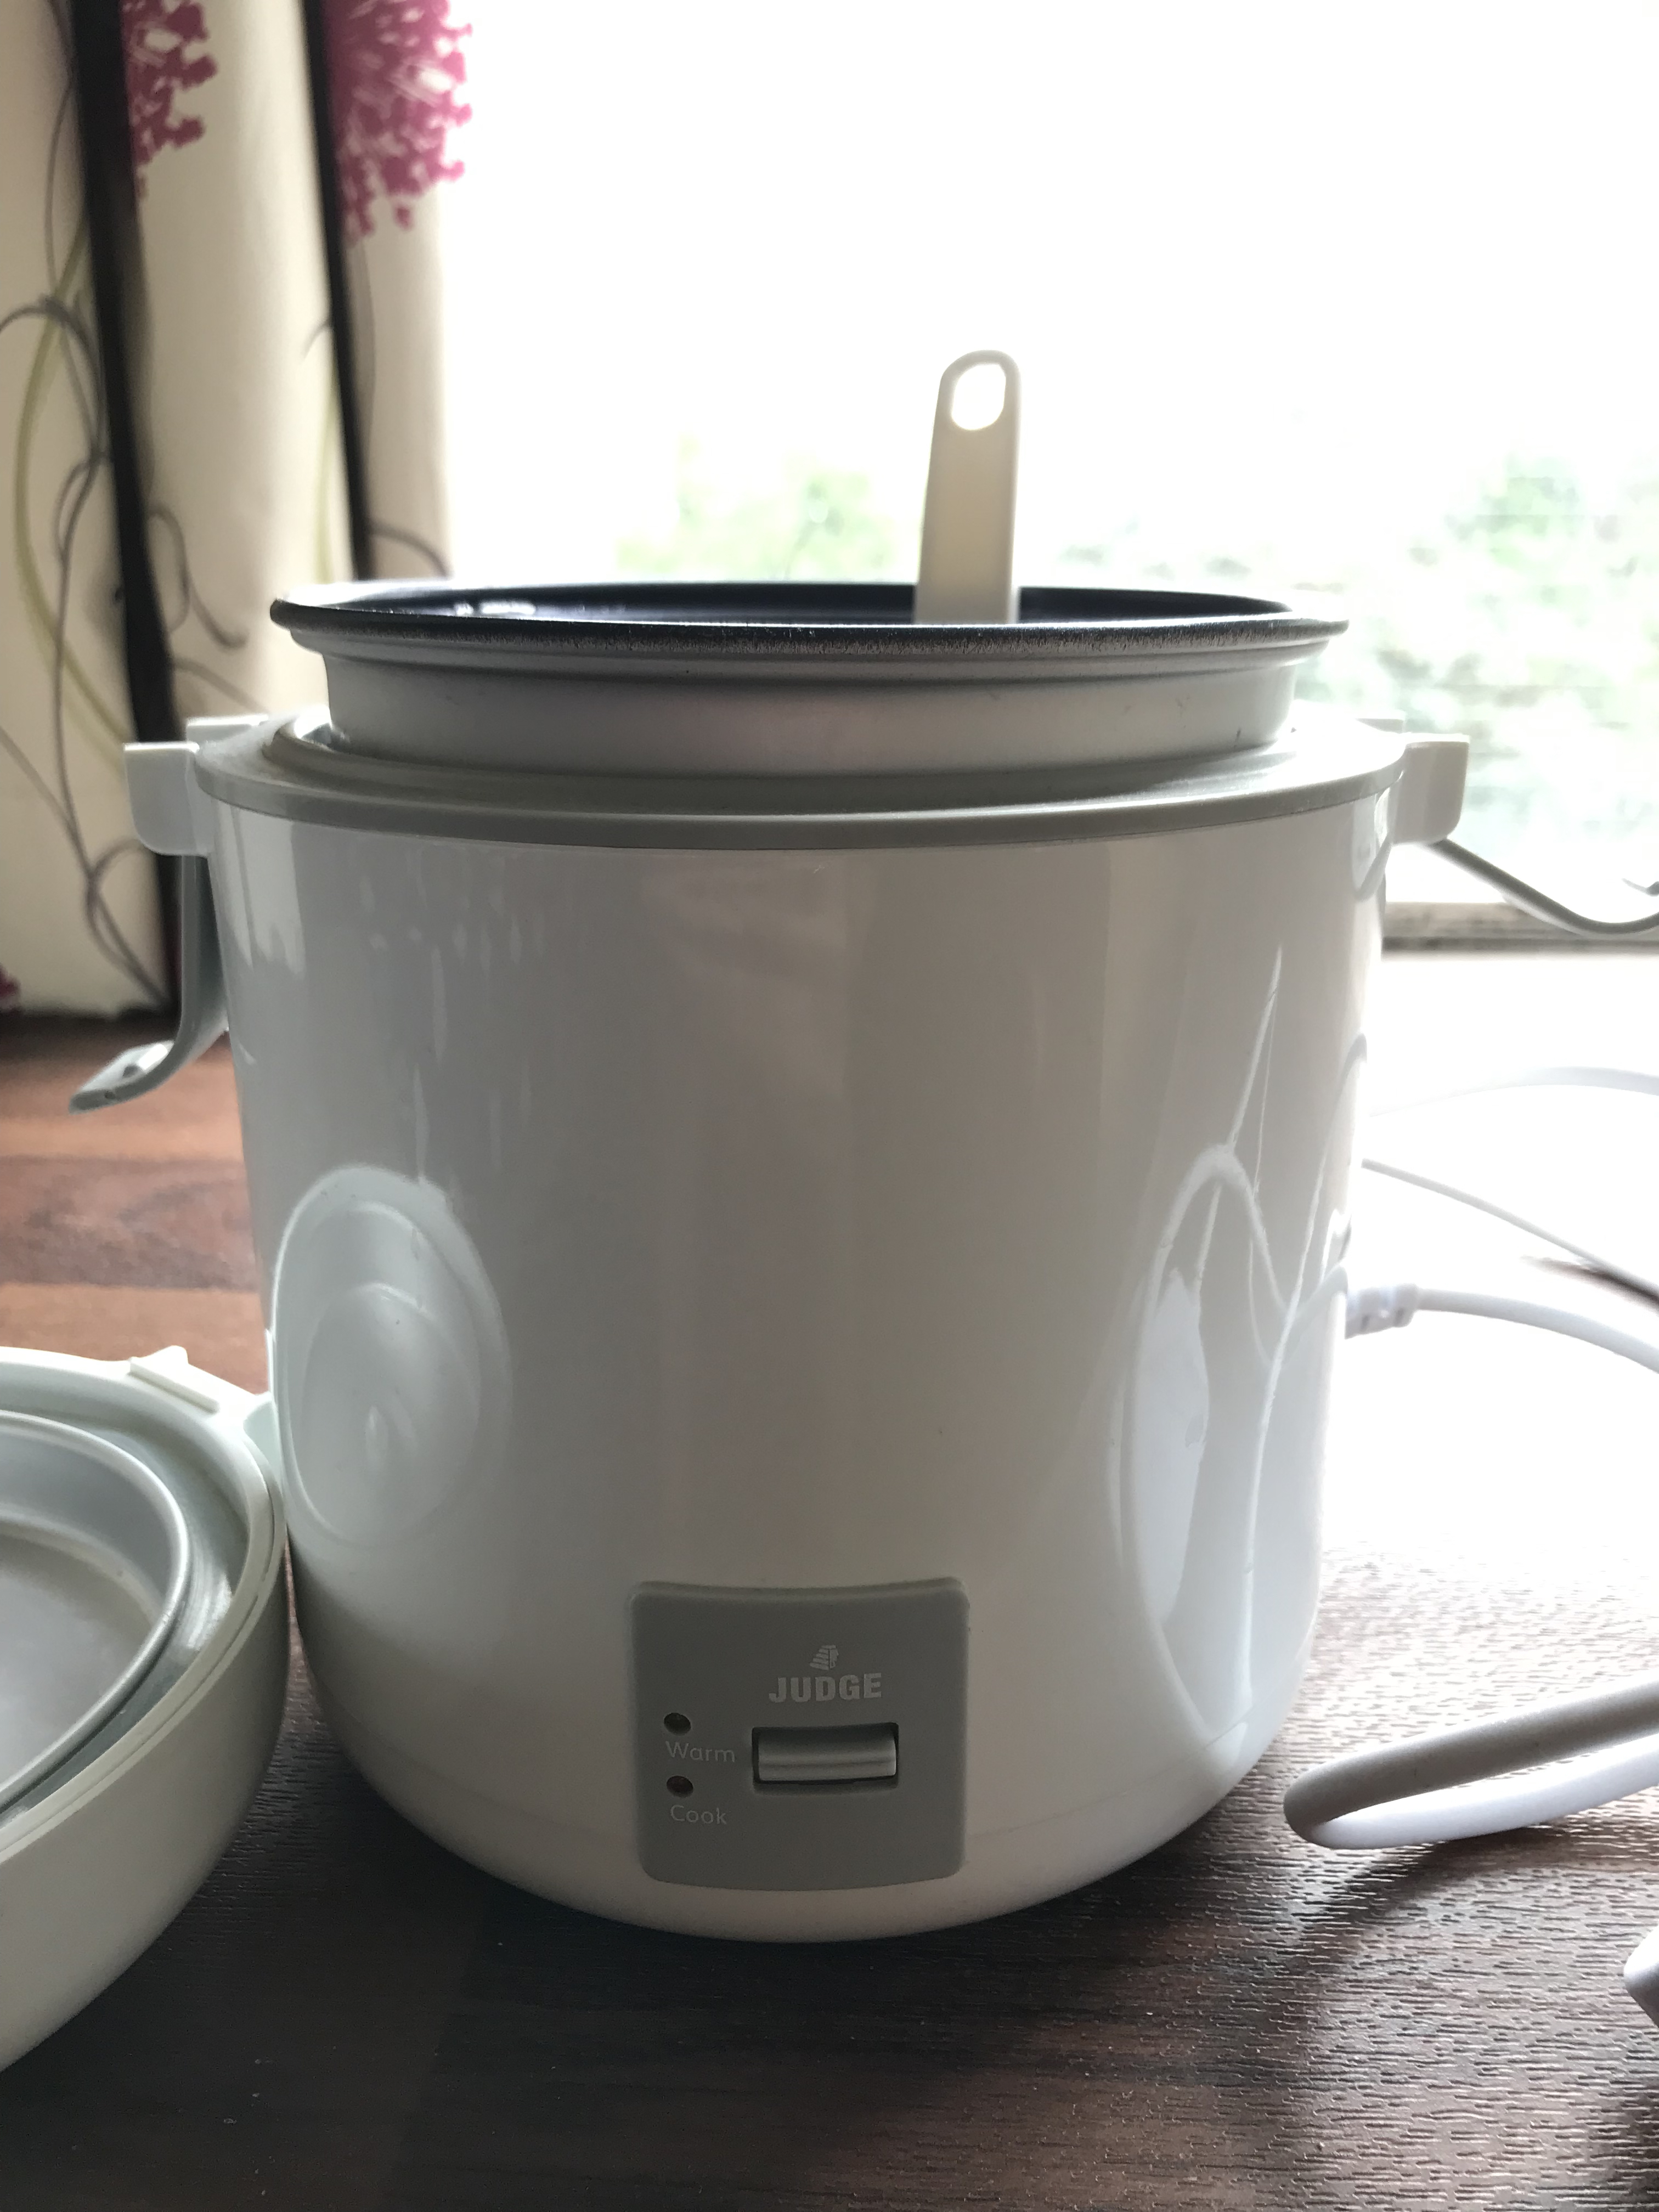 Judge Electric Rice Cooker